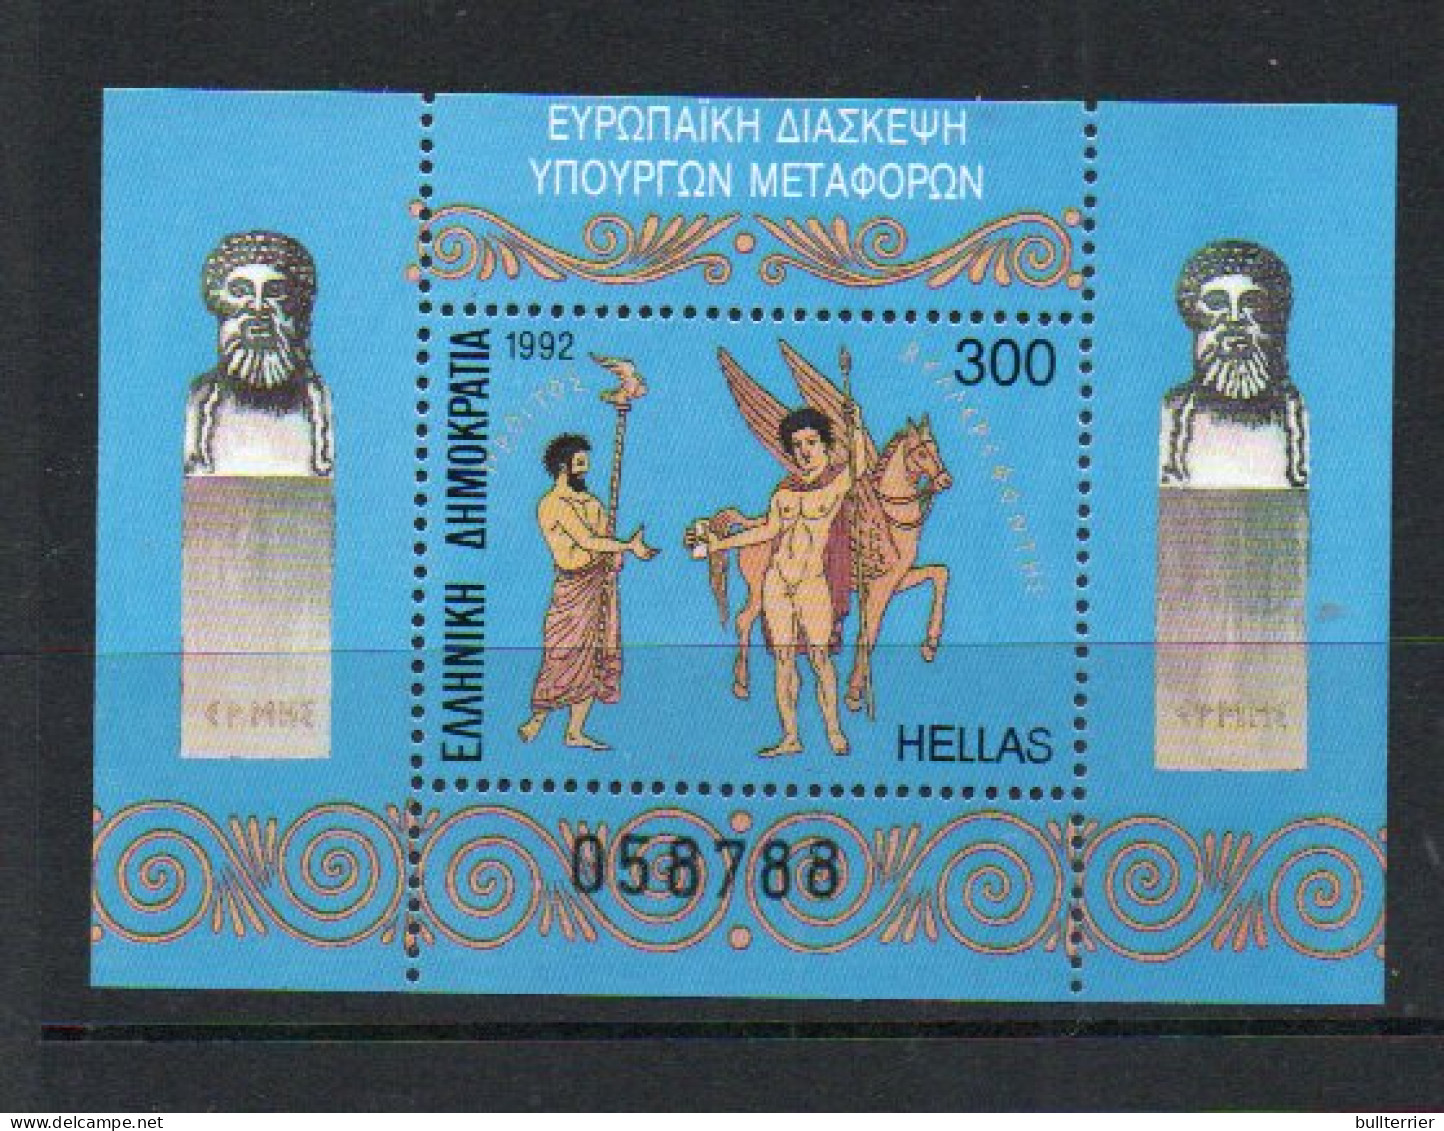 GREECE - 1992- EUROPEAN TRANSPORT MINISTERS UCONF  (sg Ms 1903)  SOUVENIR SHEET  MINT NEVER HINGED,SG £16 - Nuovi